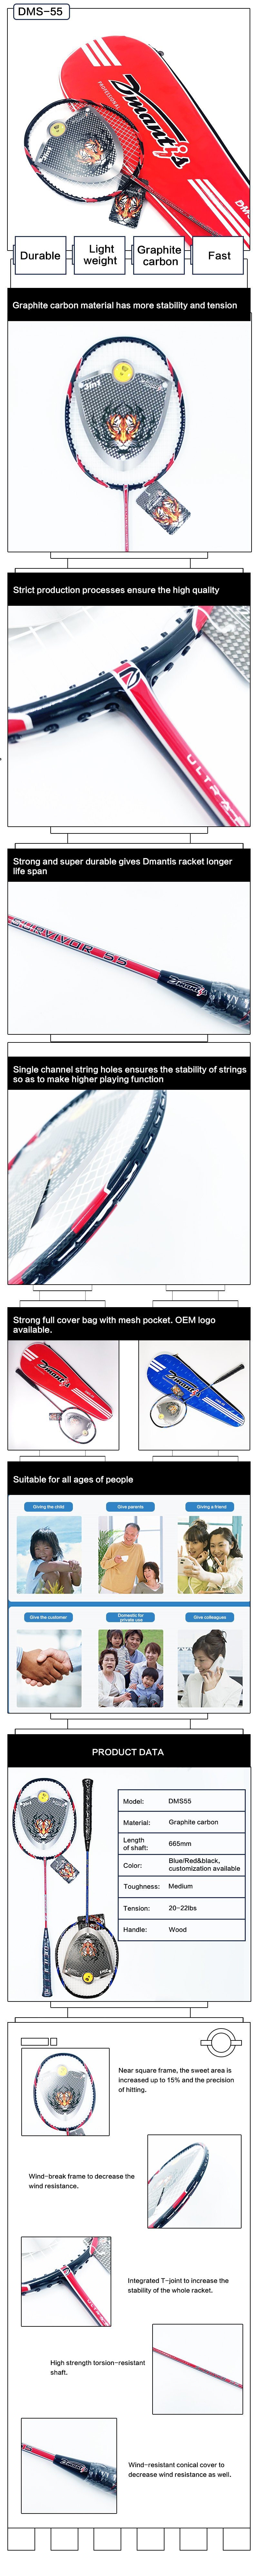 Wholesale Customized High Quality Offensive/Attackingr Badminton Racket